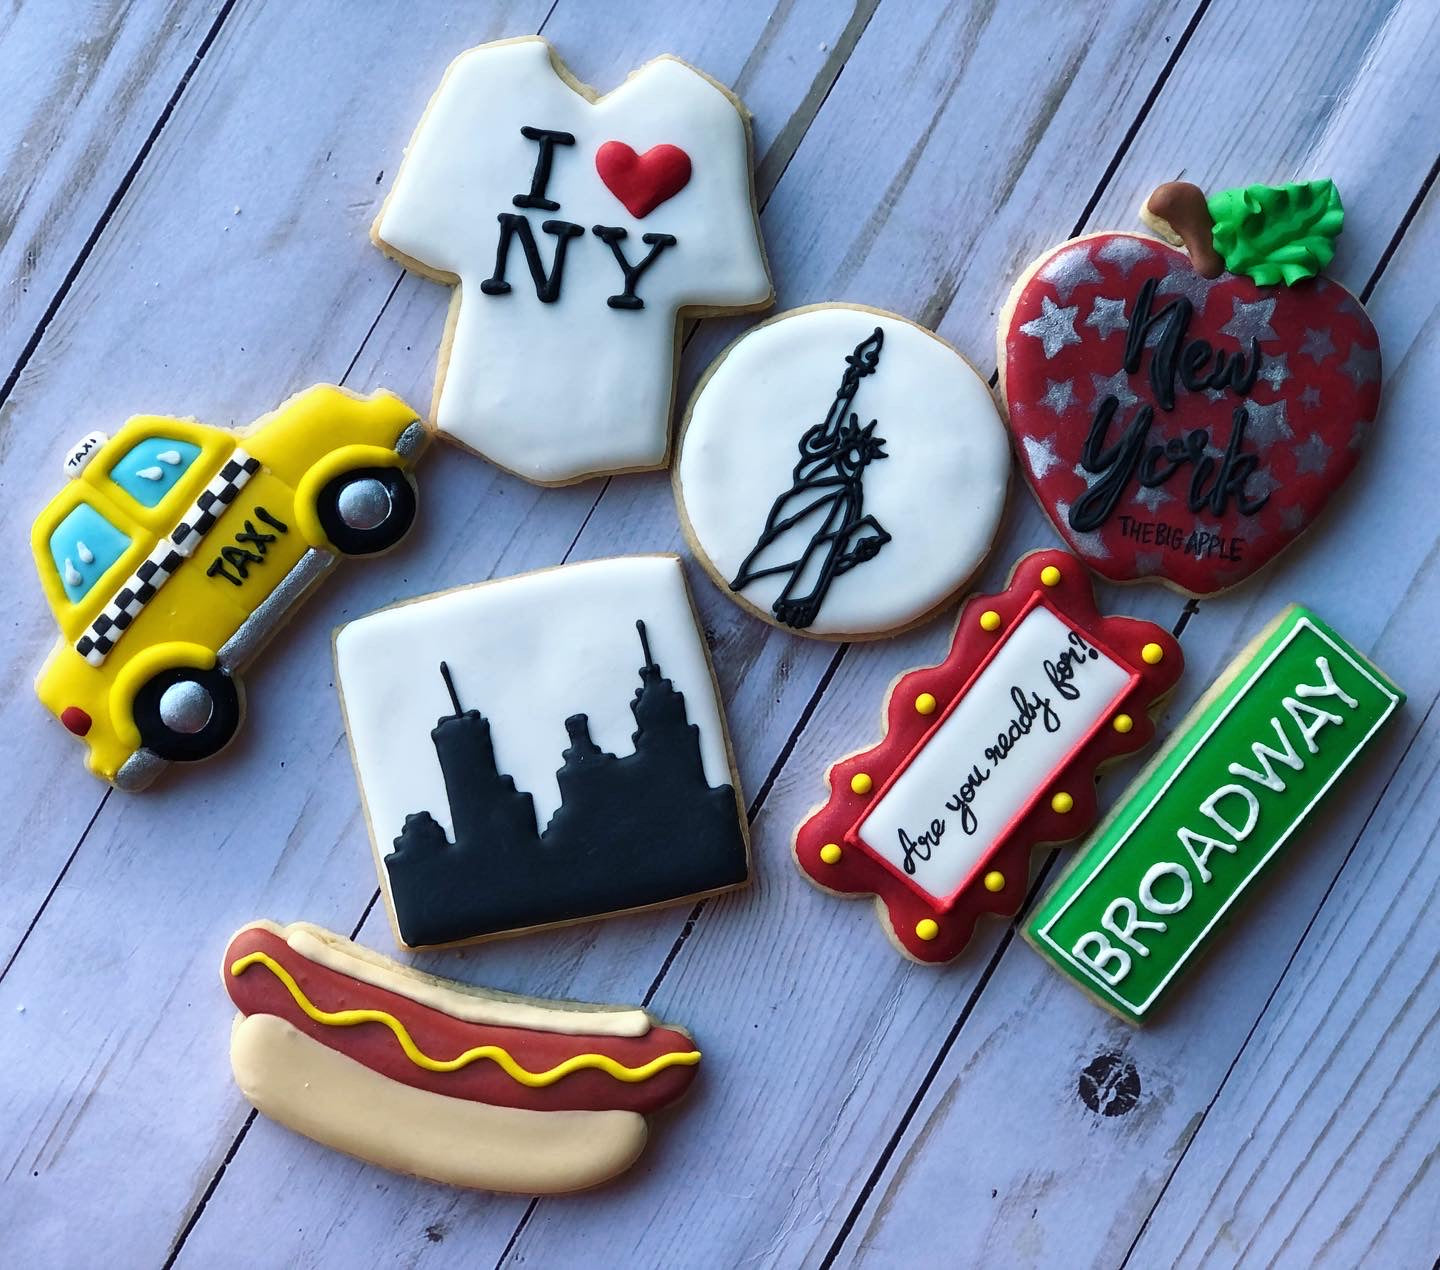 The New York Cookie Boutique LLC - Louis Vuitton Theme 30th Birthday Cookies!